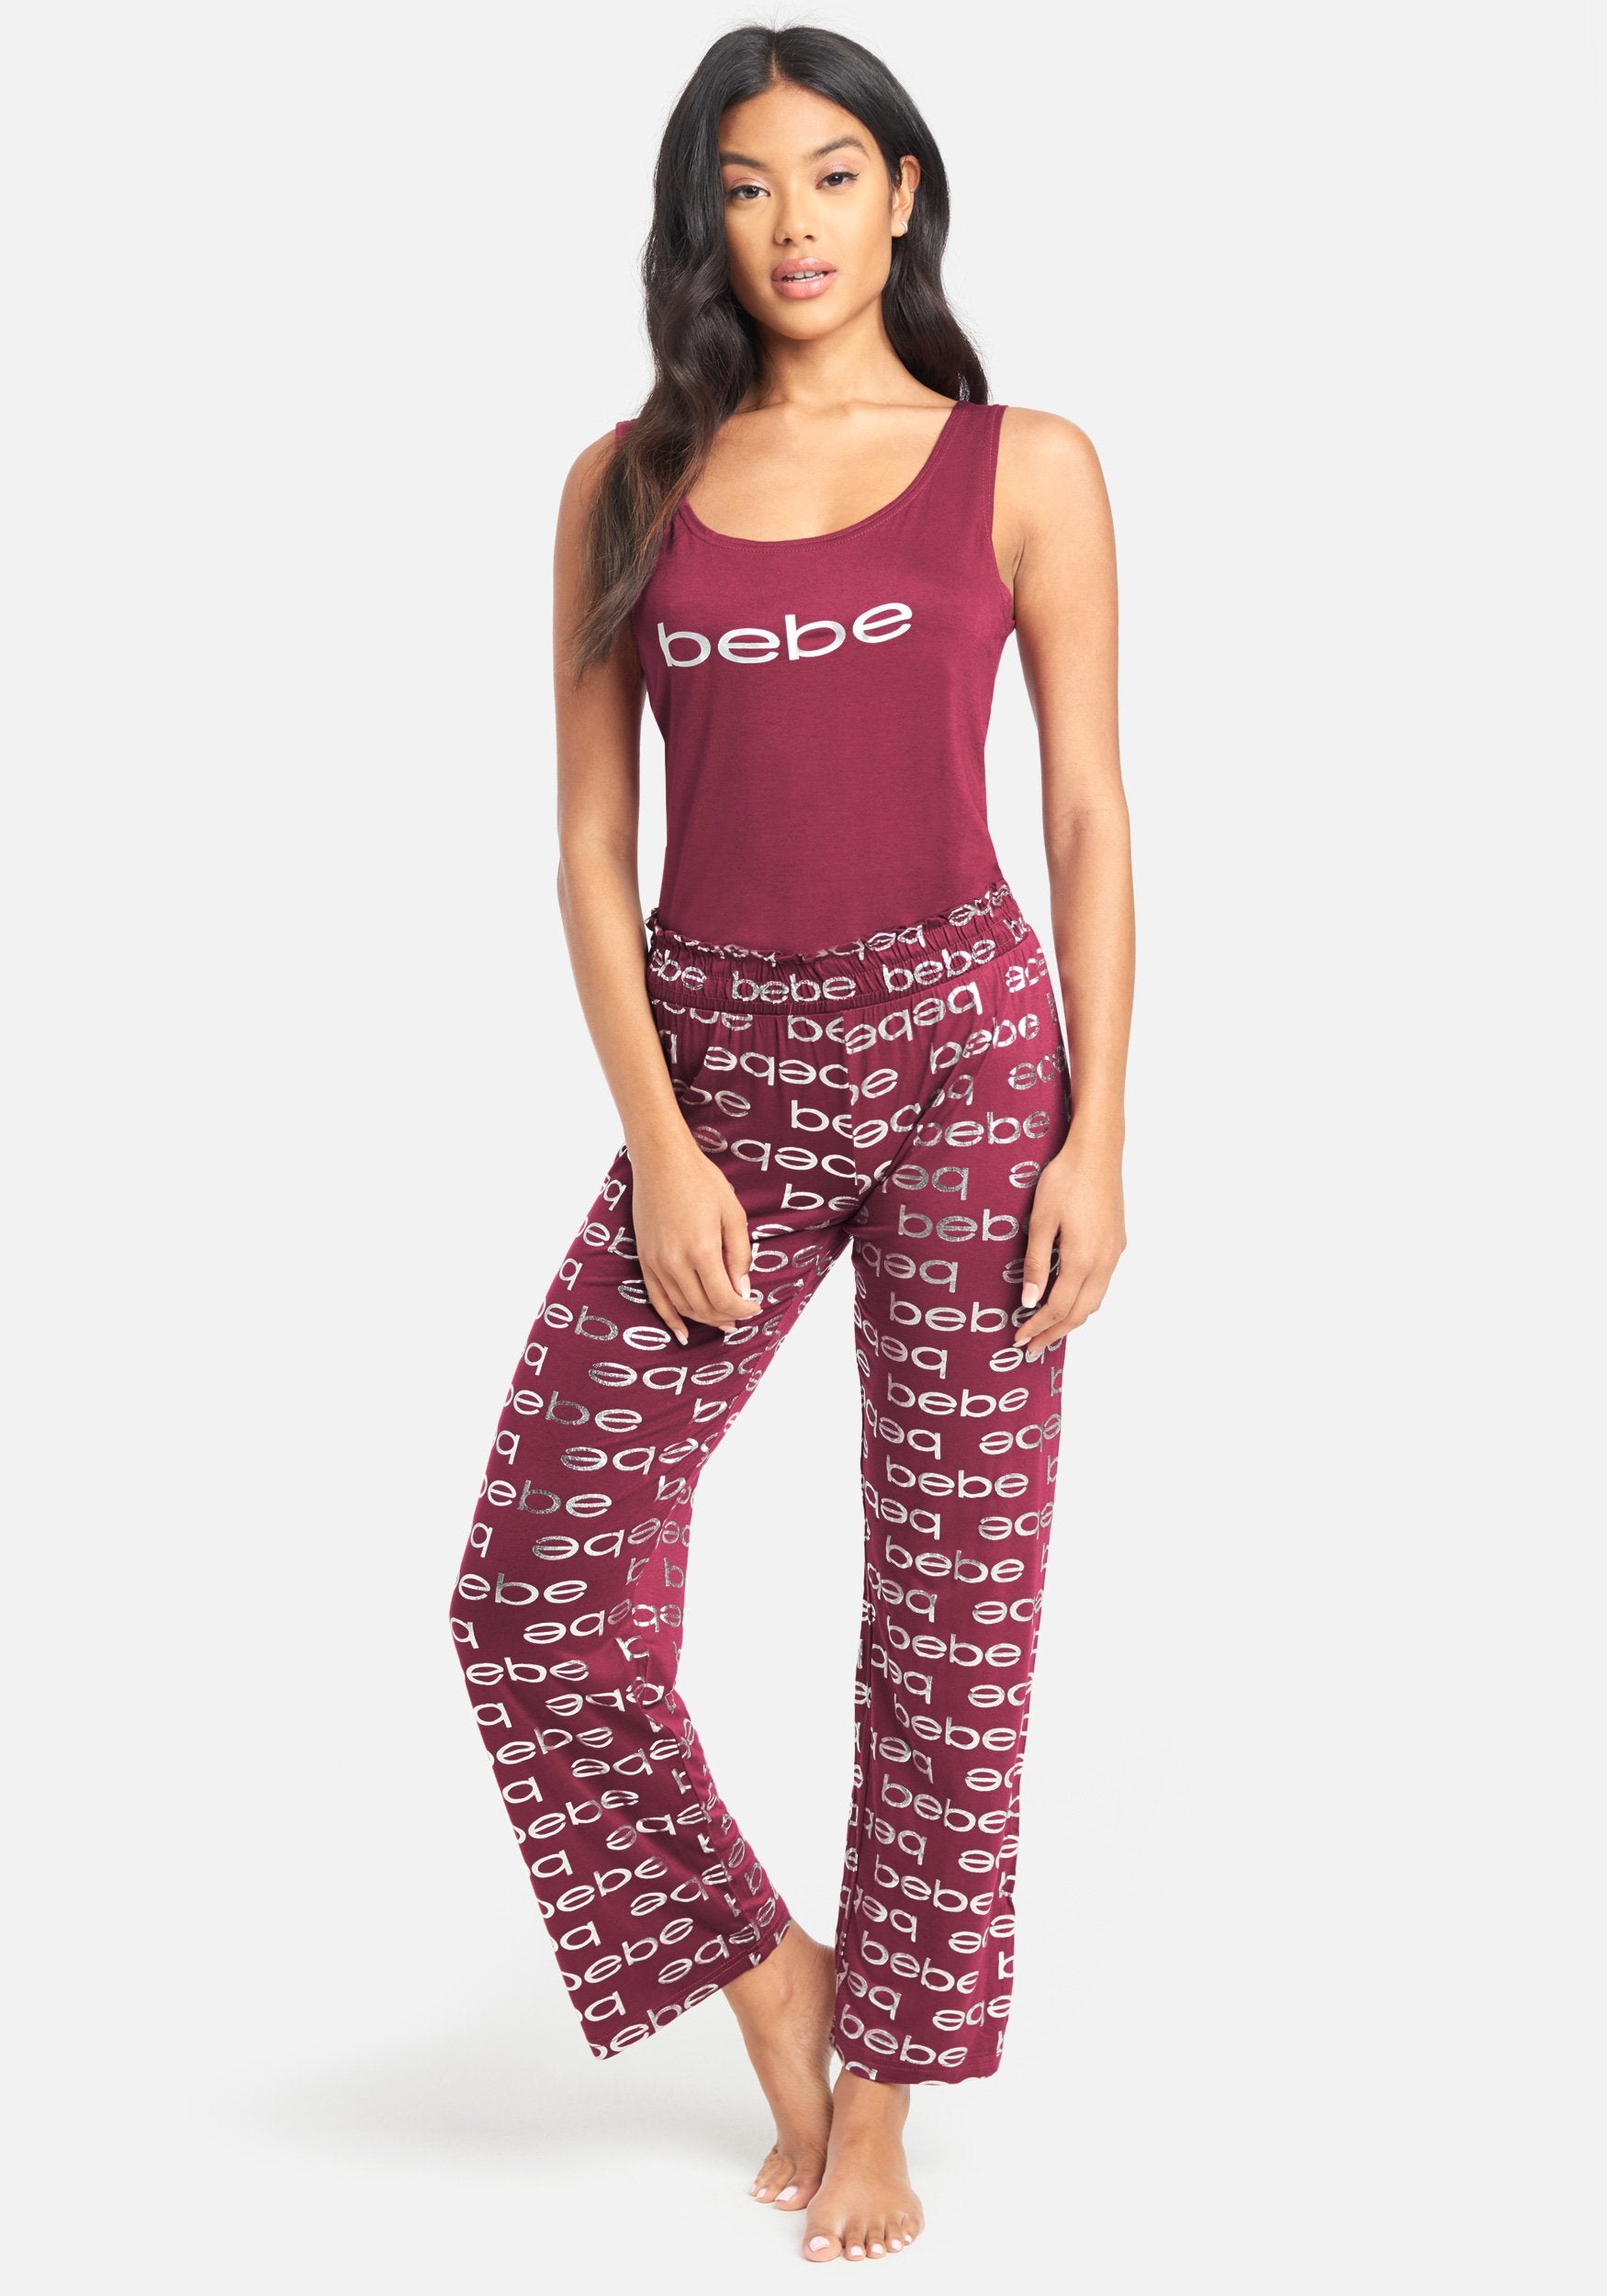 Bebe coupon: Women's Allover Bebe Pant Set, Size XL in Plum Spandex